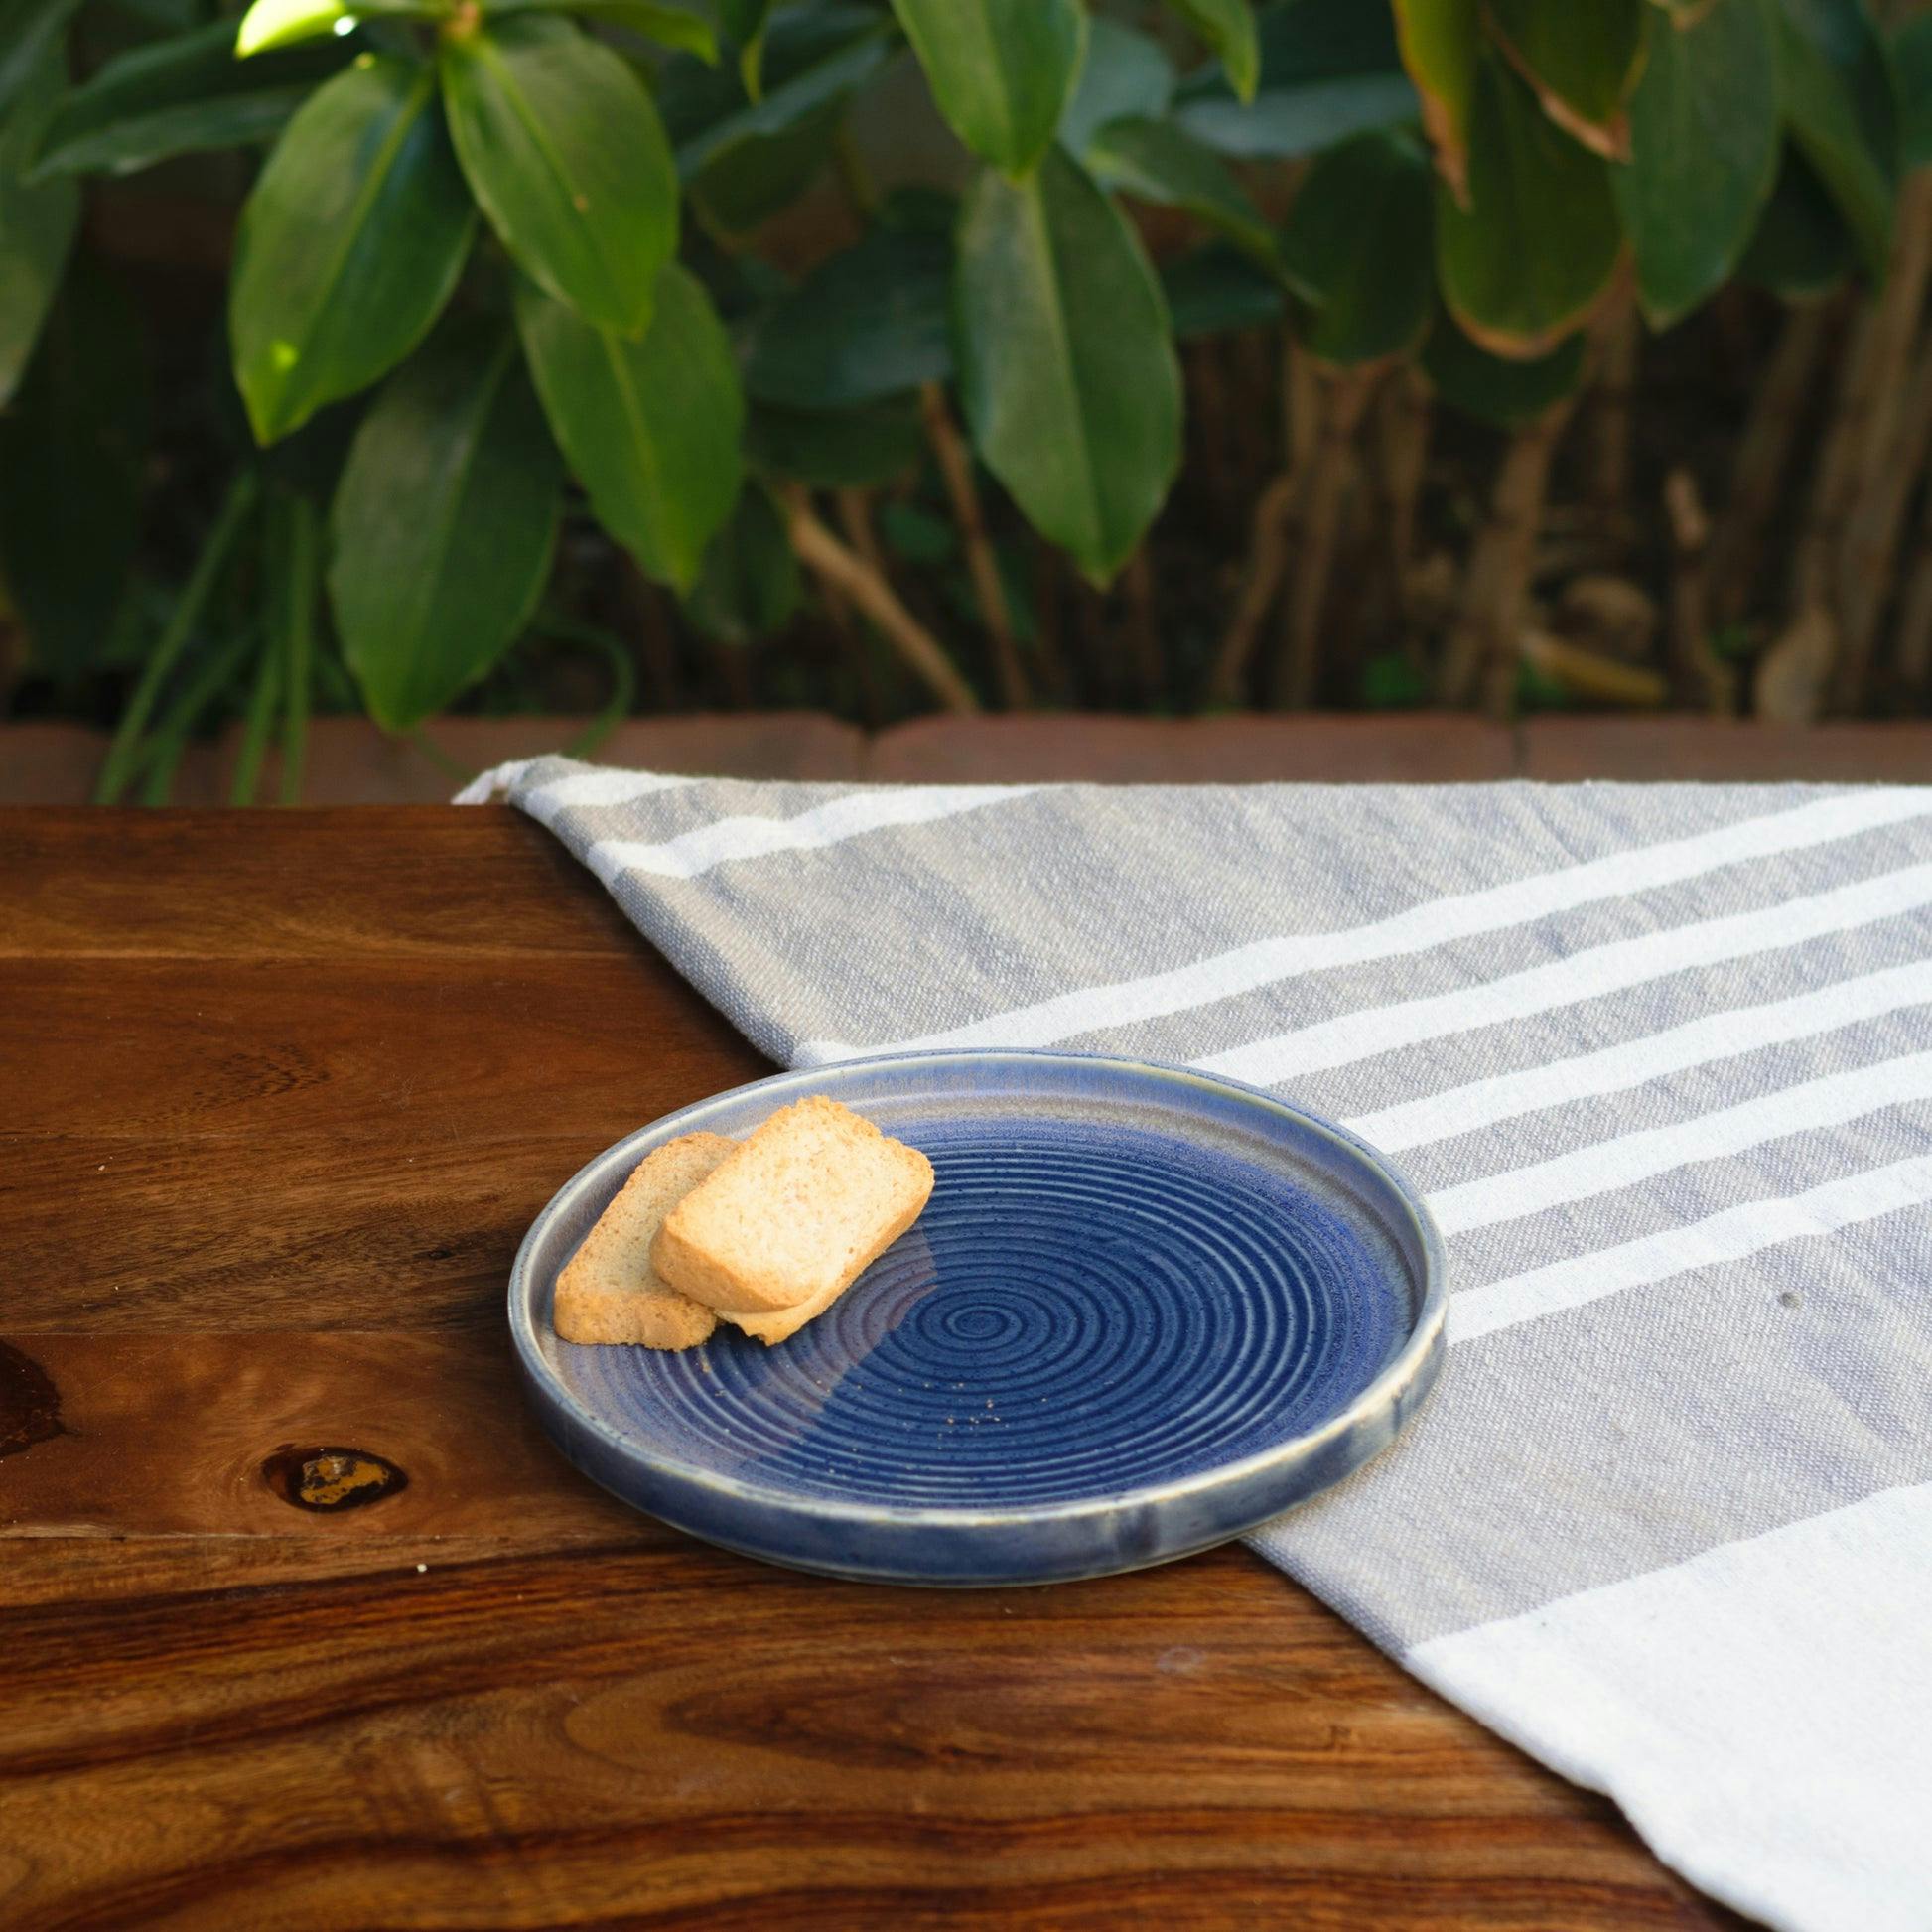 Sea Round Platter/Plates, a product by Oh Yay project